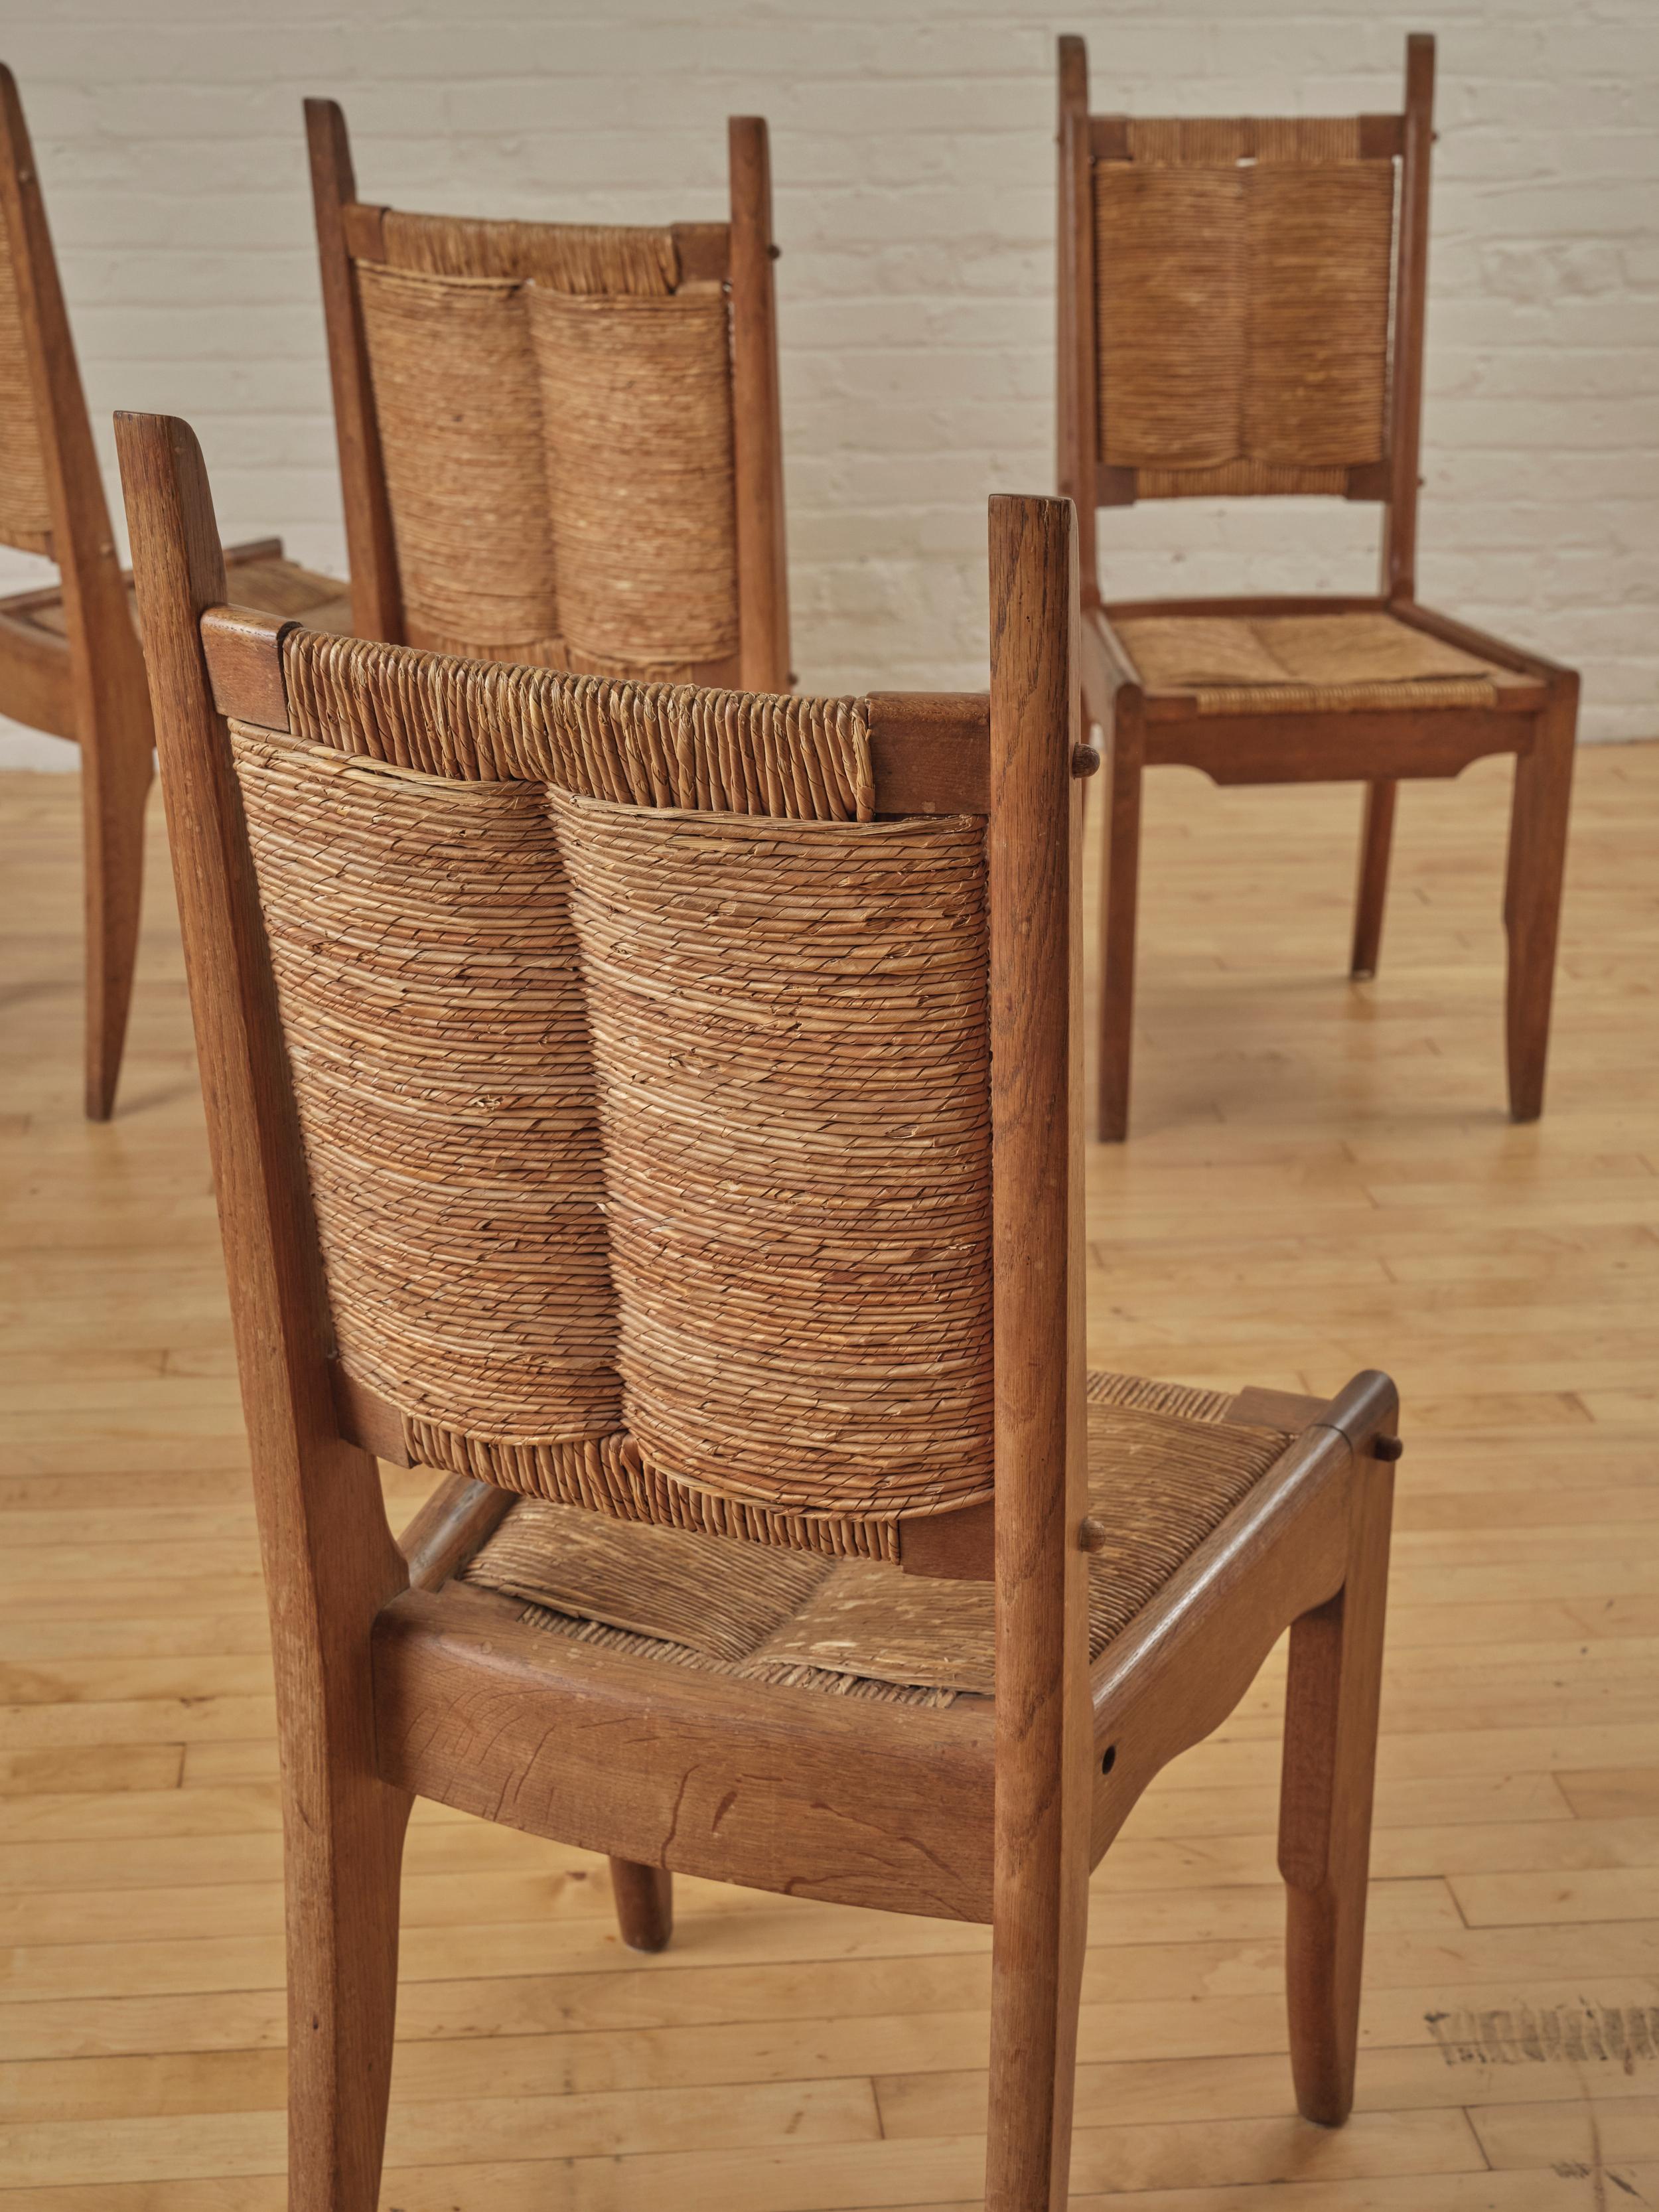 20th Century Set of 4 Dining Chairs by Guillerme and Chambron for Notre maison C. 1950's For Sale